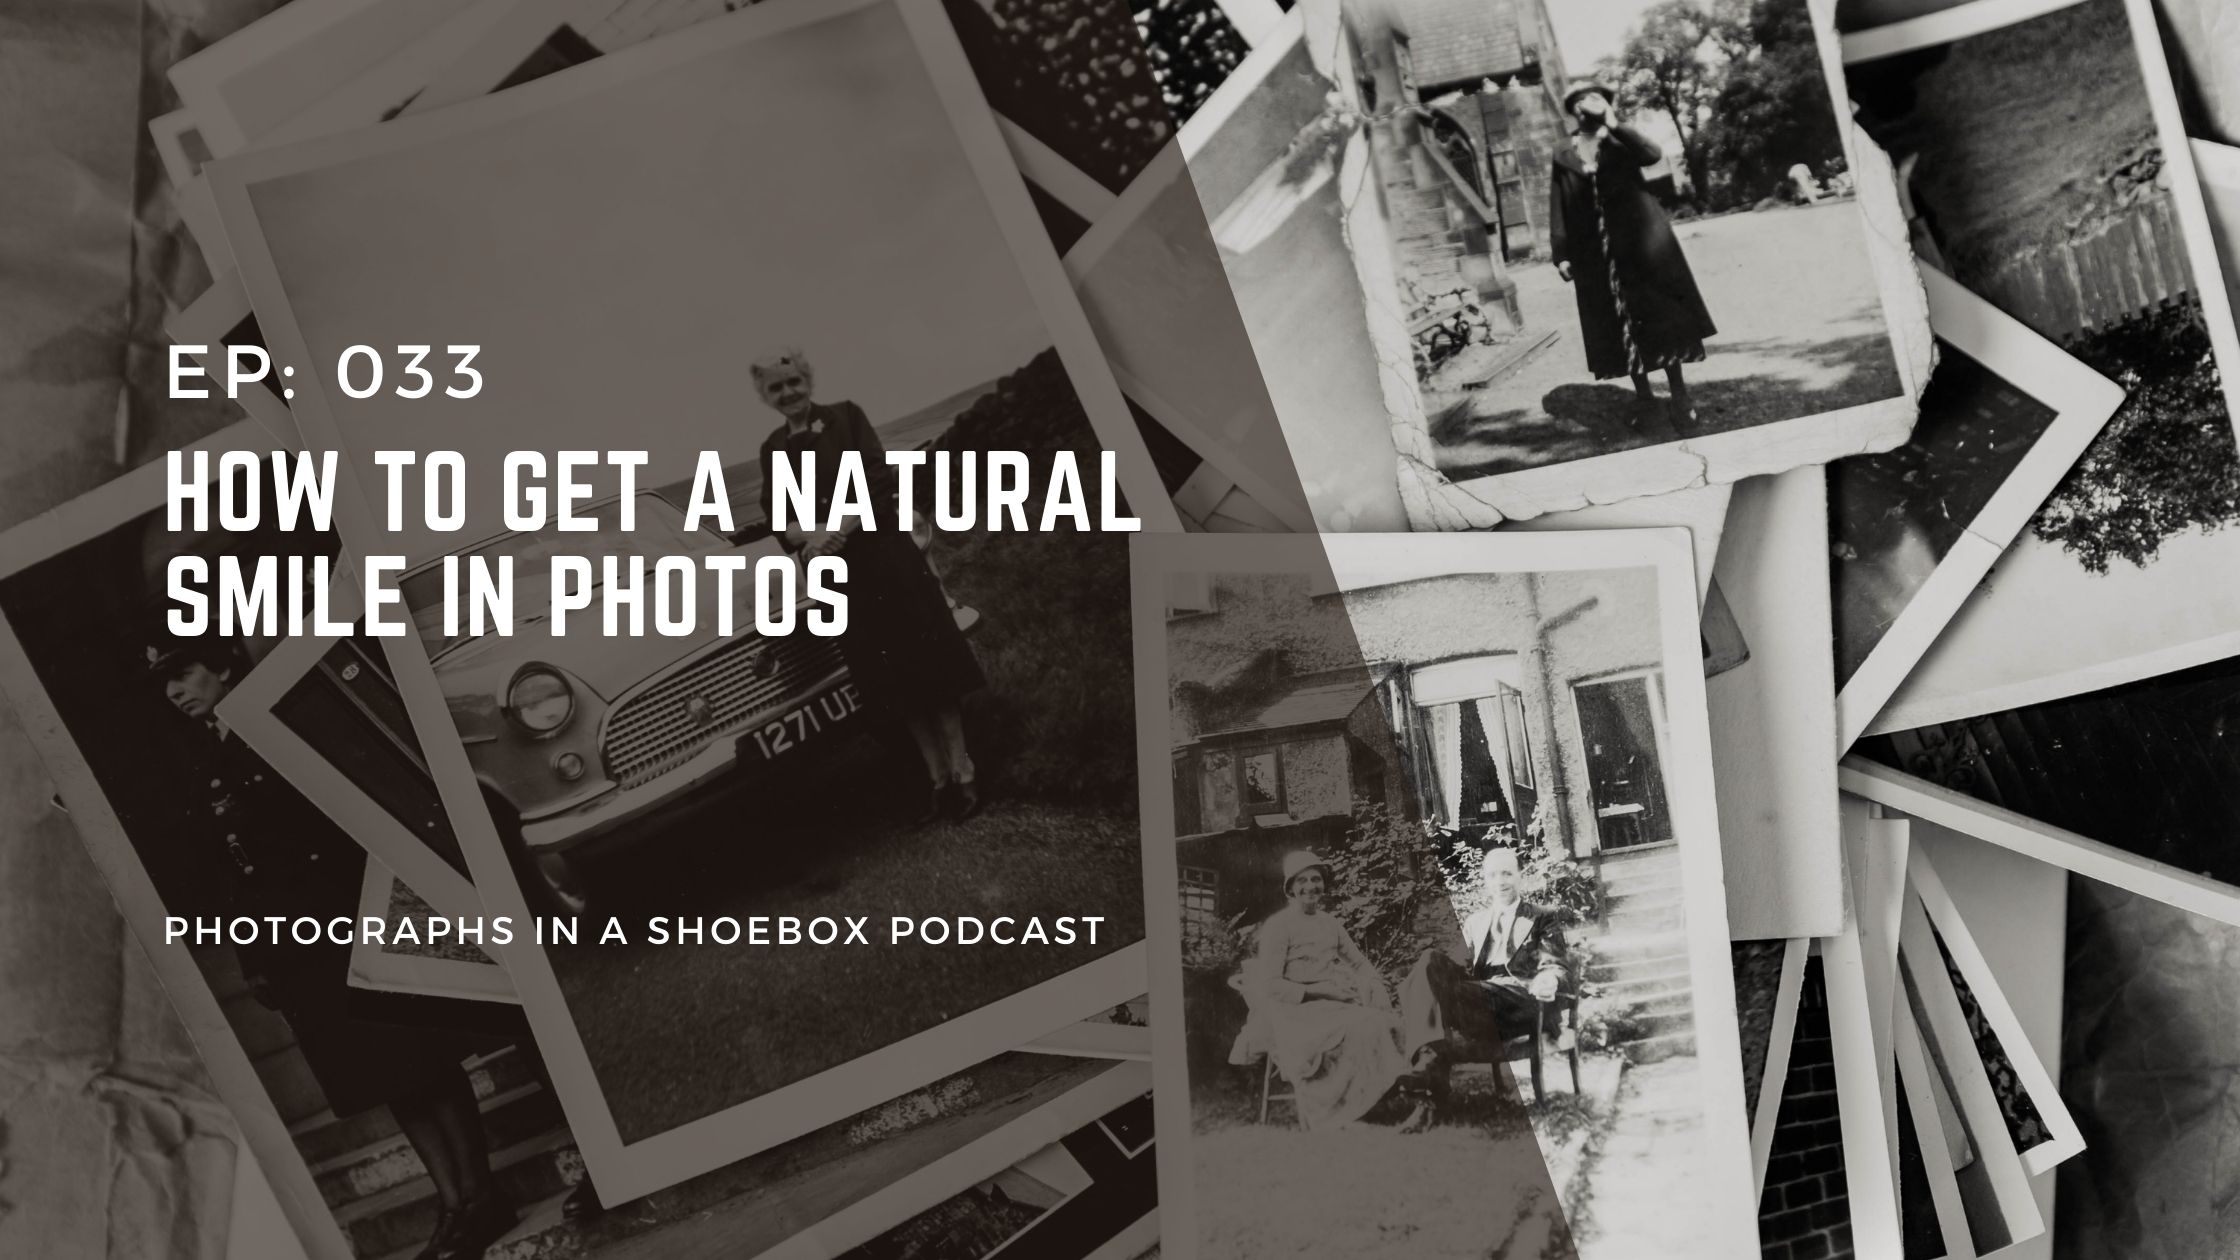 Artwork depicting lots of family photographs for the podcast episode how to get a natural smile in photos